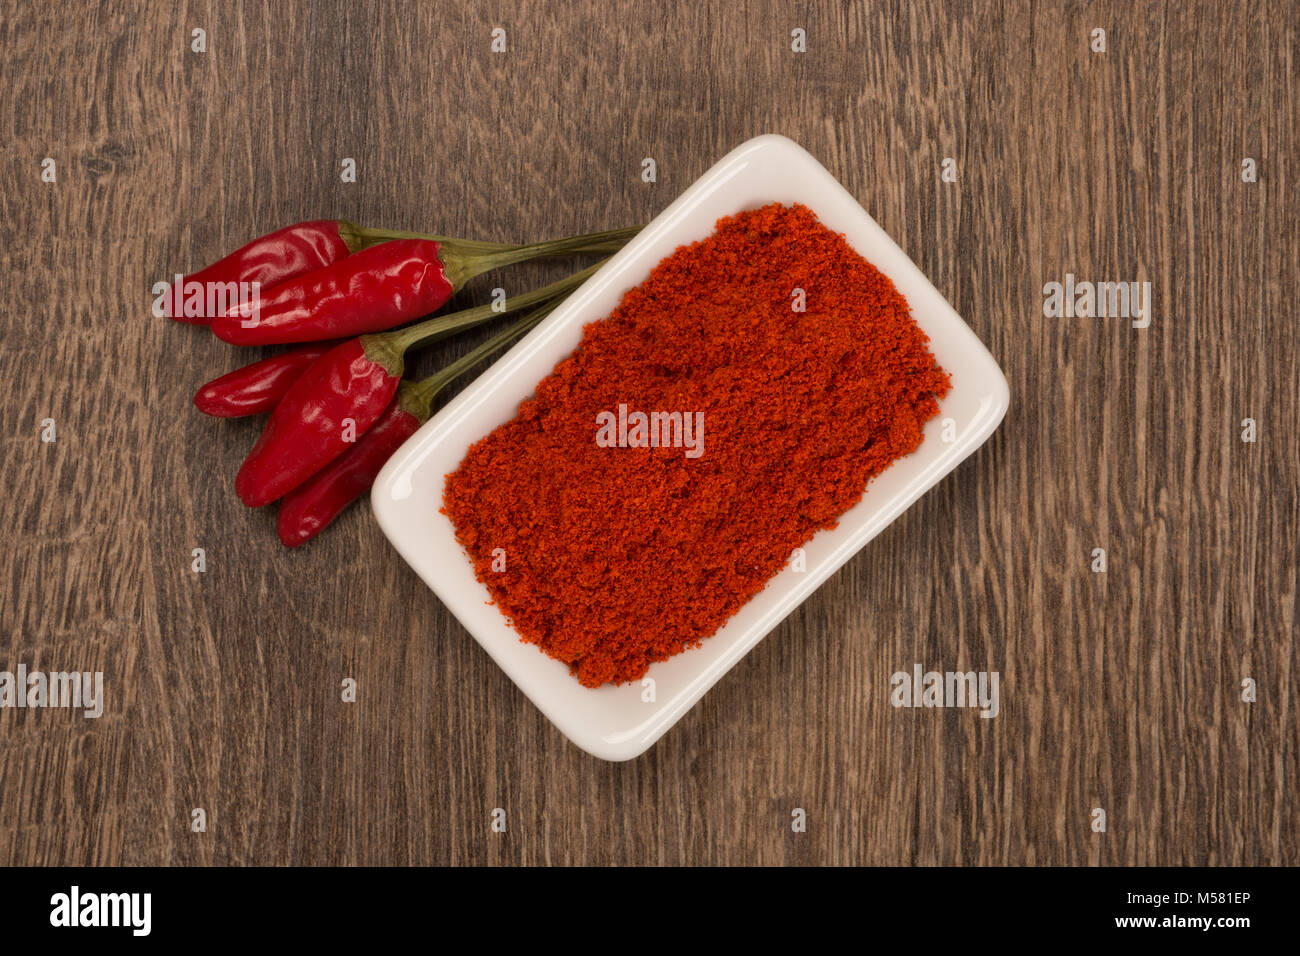 Ground and whole peppers on rustic wooden table. Stock Photo